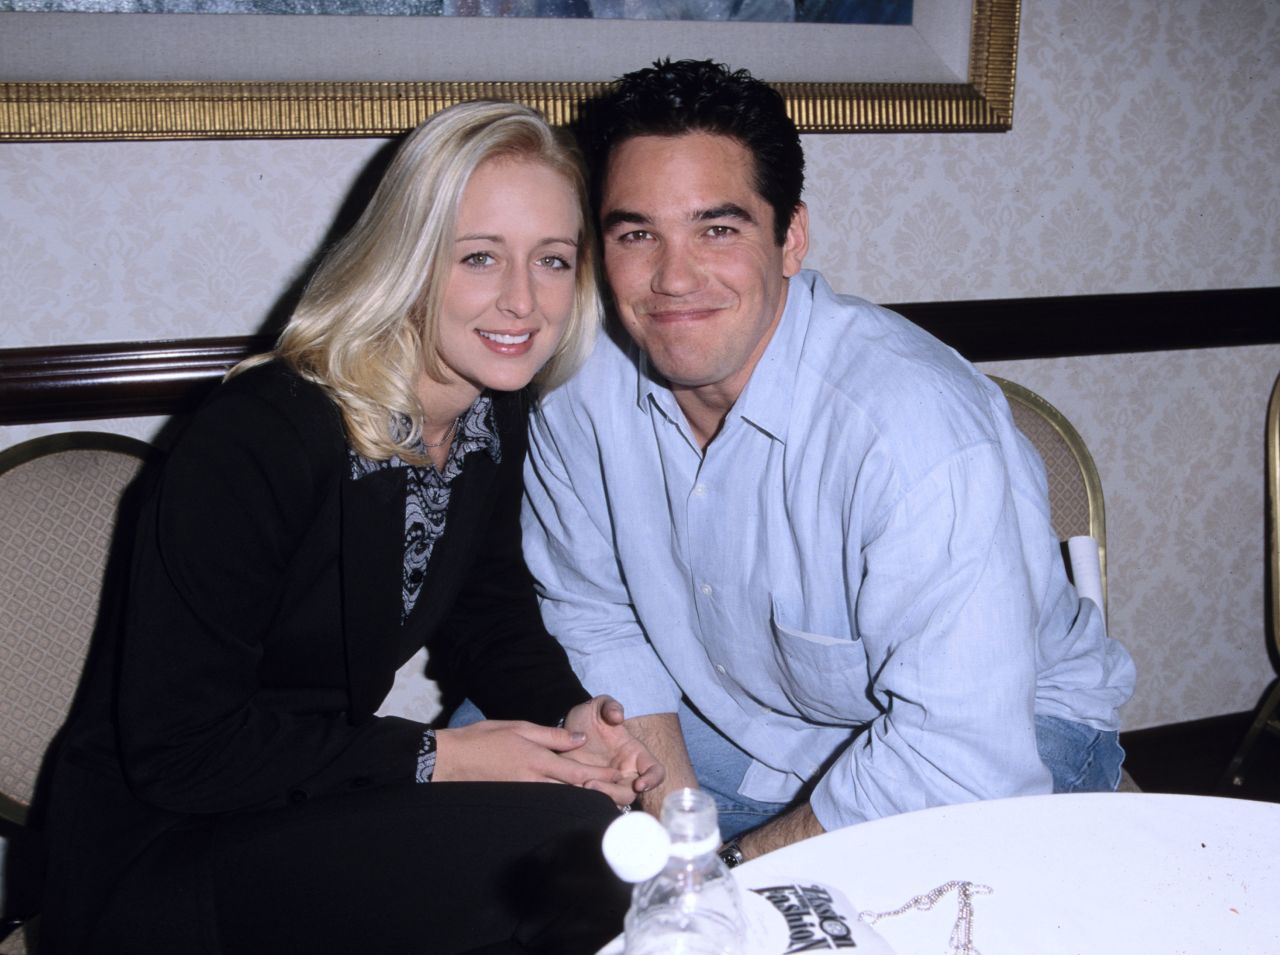 McCready with her then-fiance, Dean Cain, in January 1998.